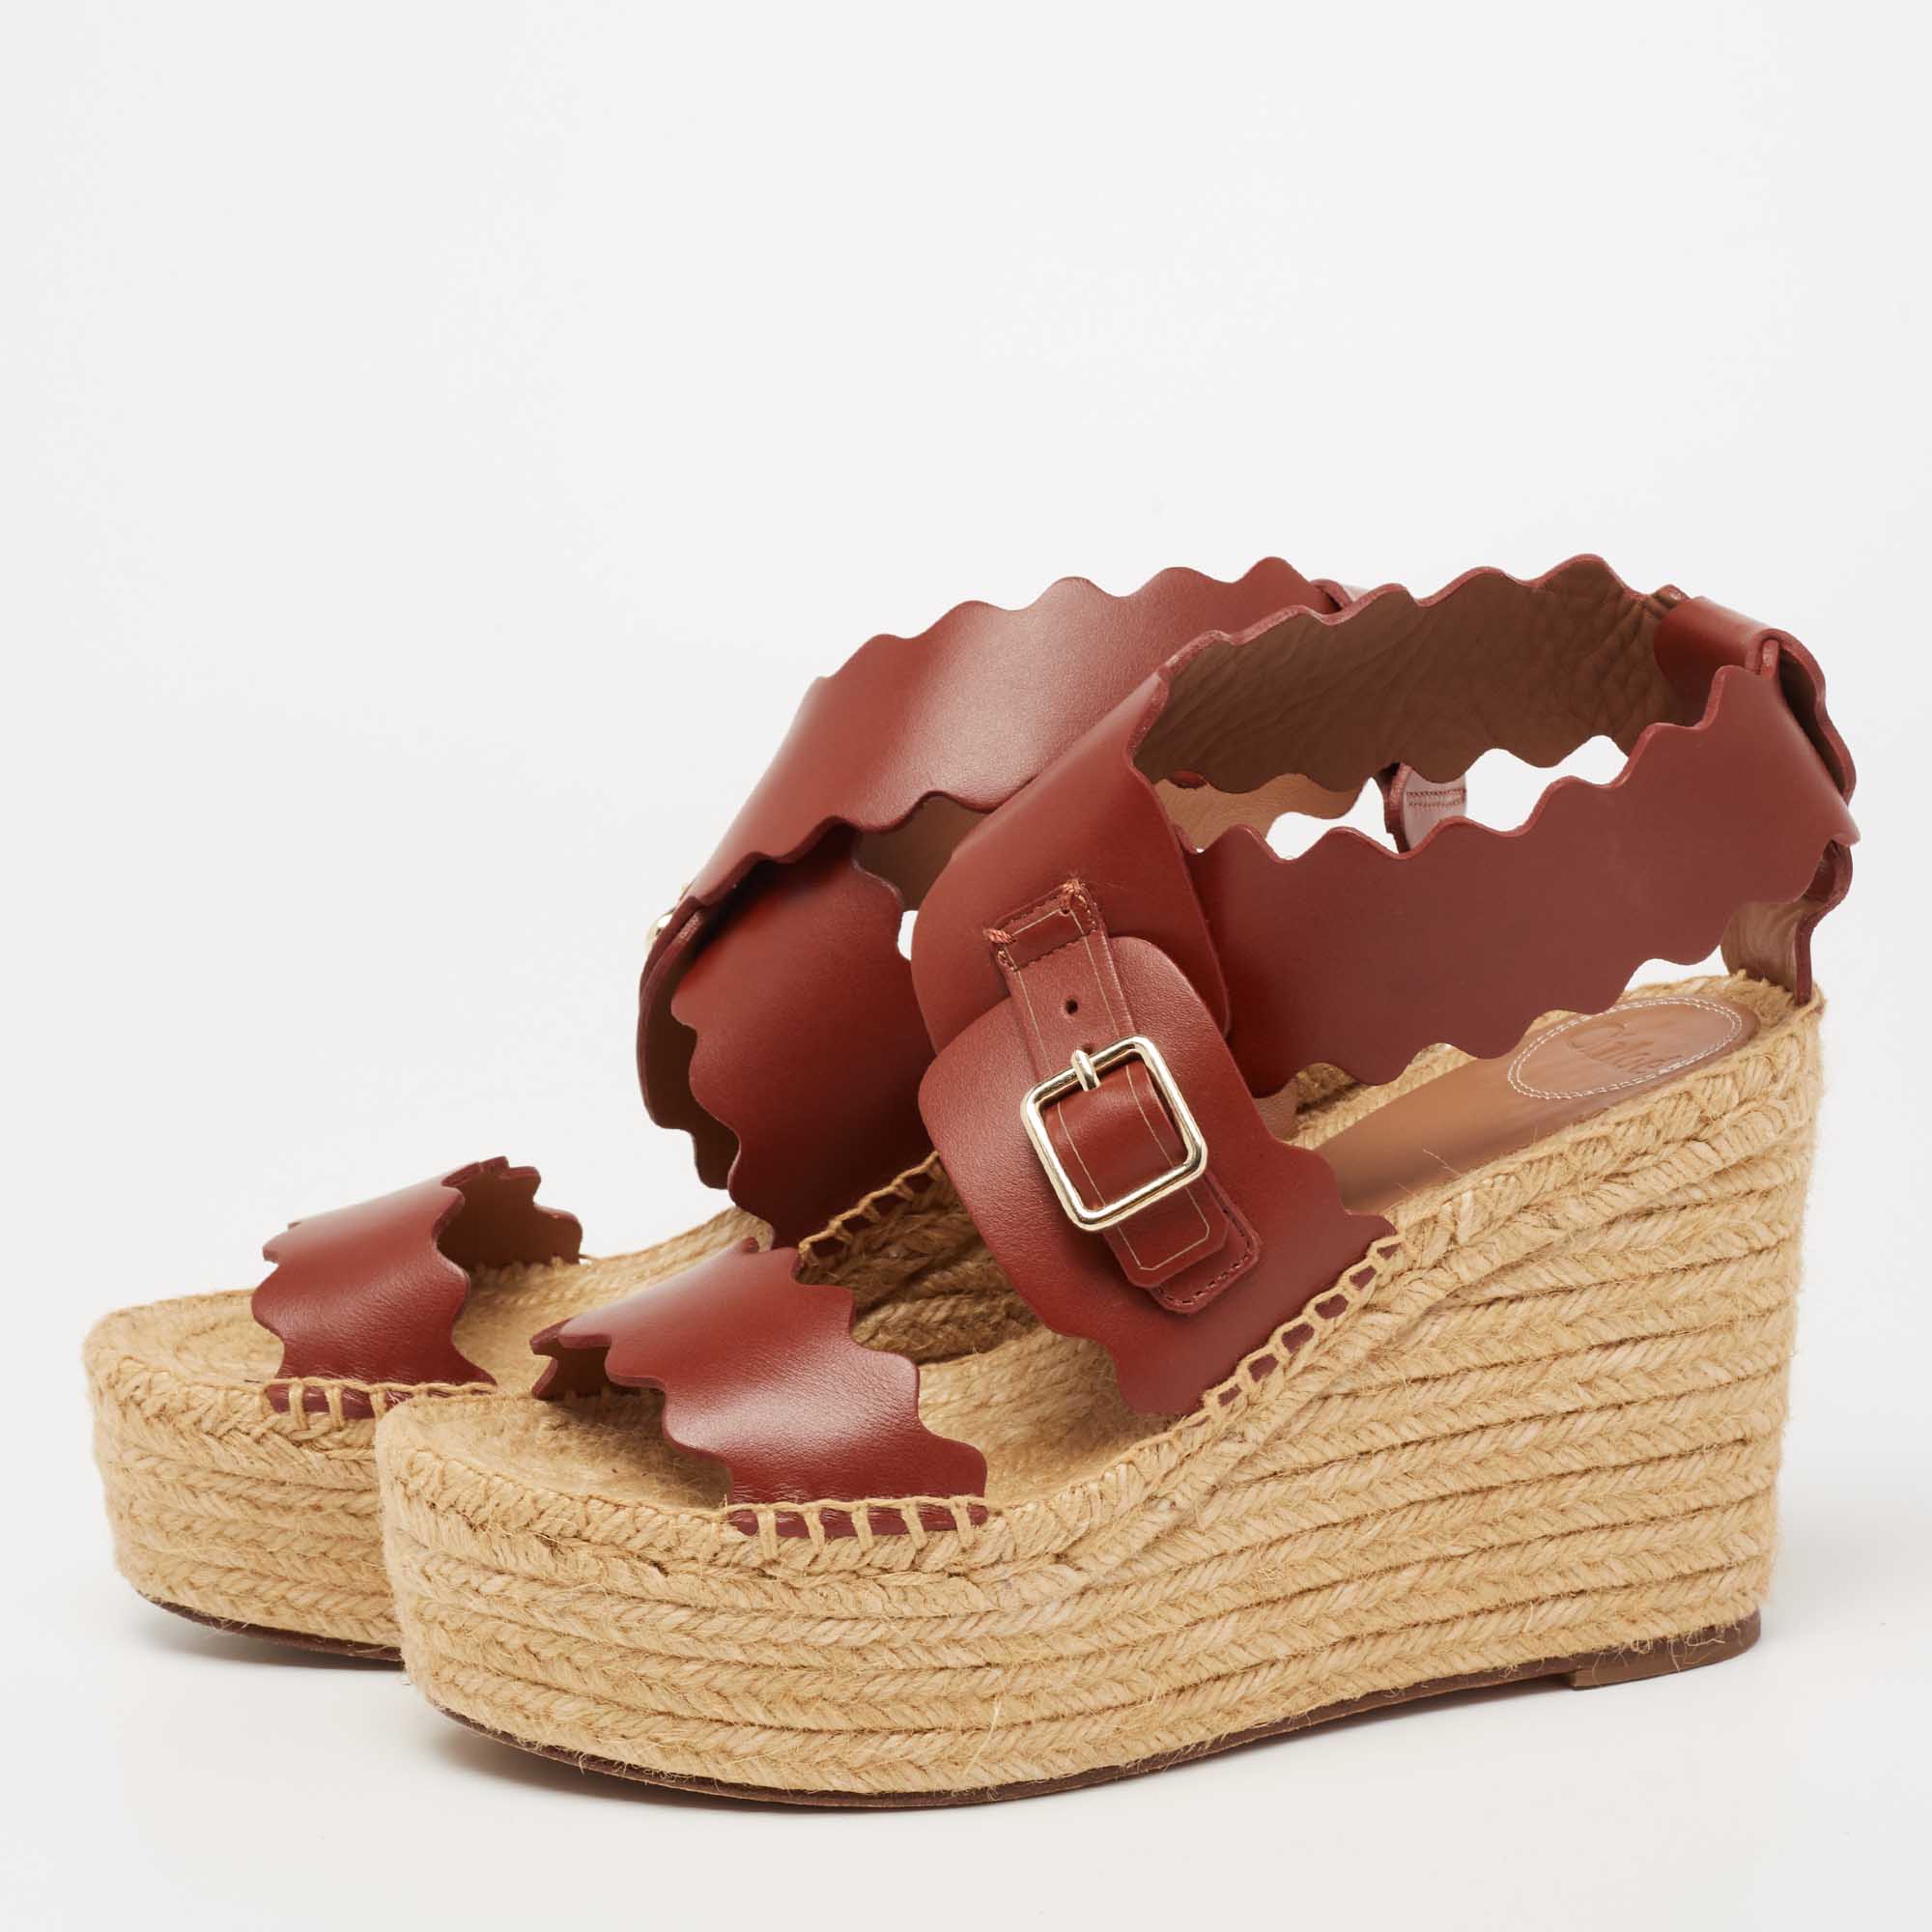 

Chloe Brown Scalloped Leather Lauren Espadrille Wedge Sandals Size